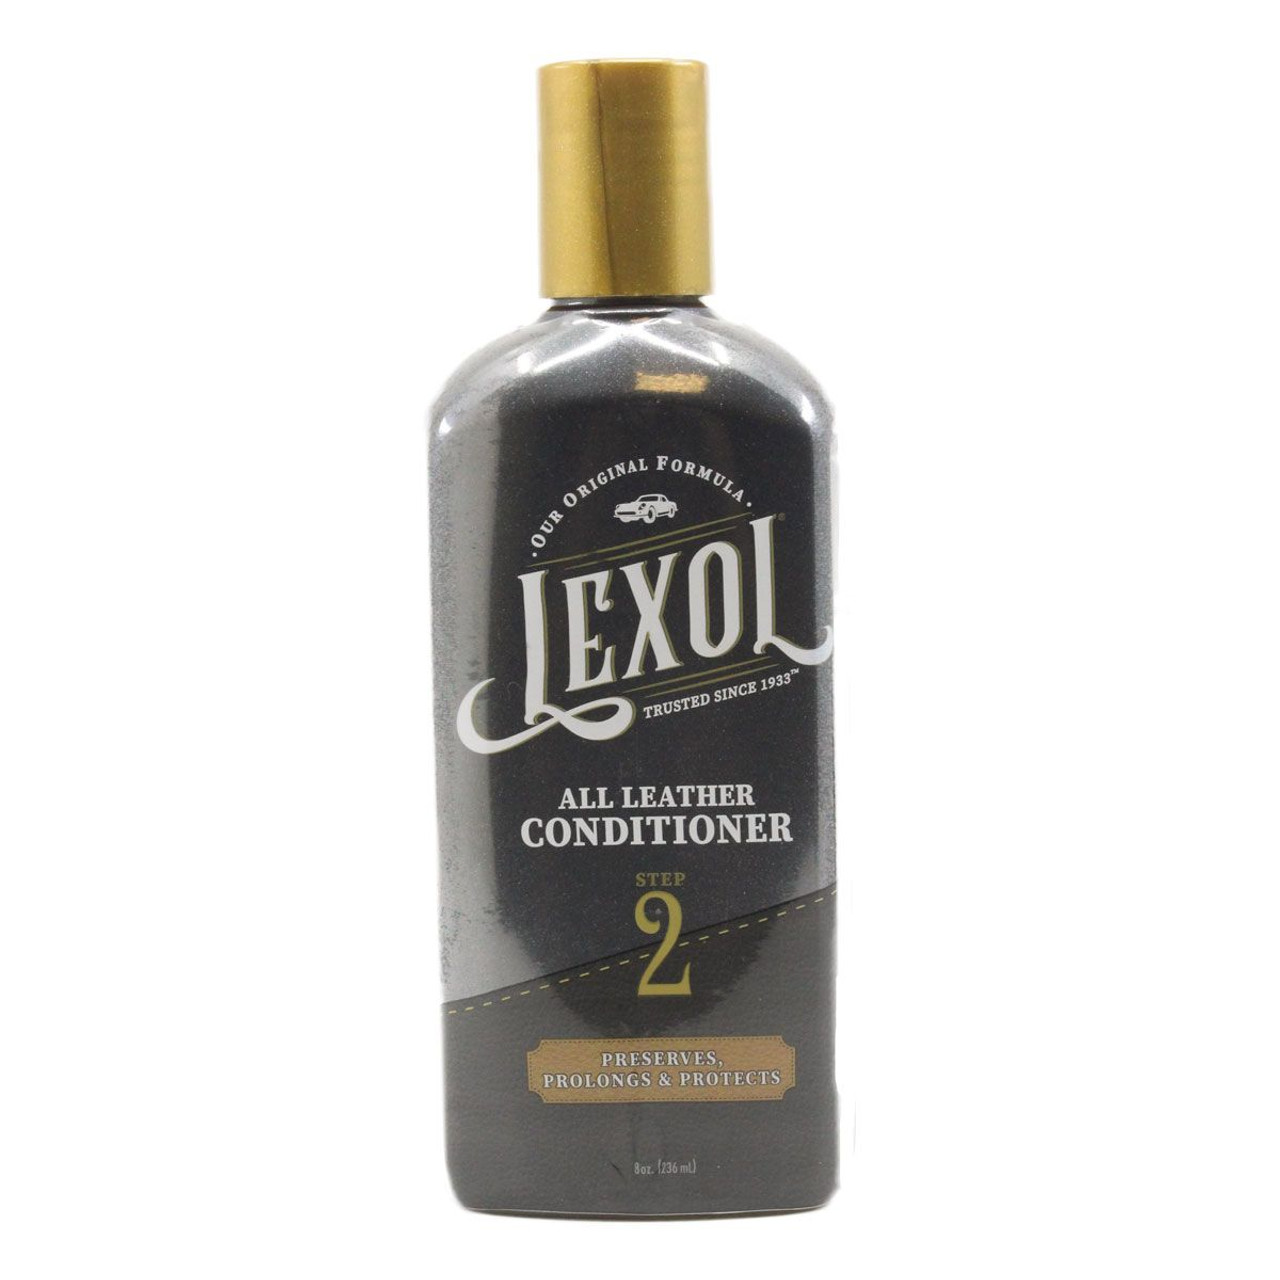 Lexol Leather Conditioner and Leather Cleaner Kit Use on Car Leather